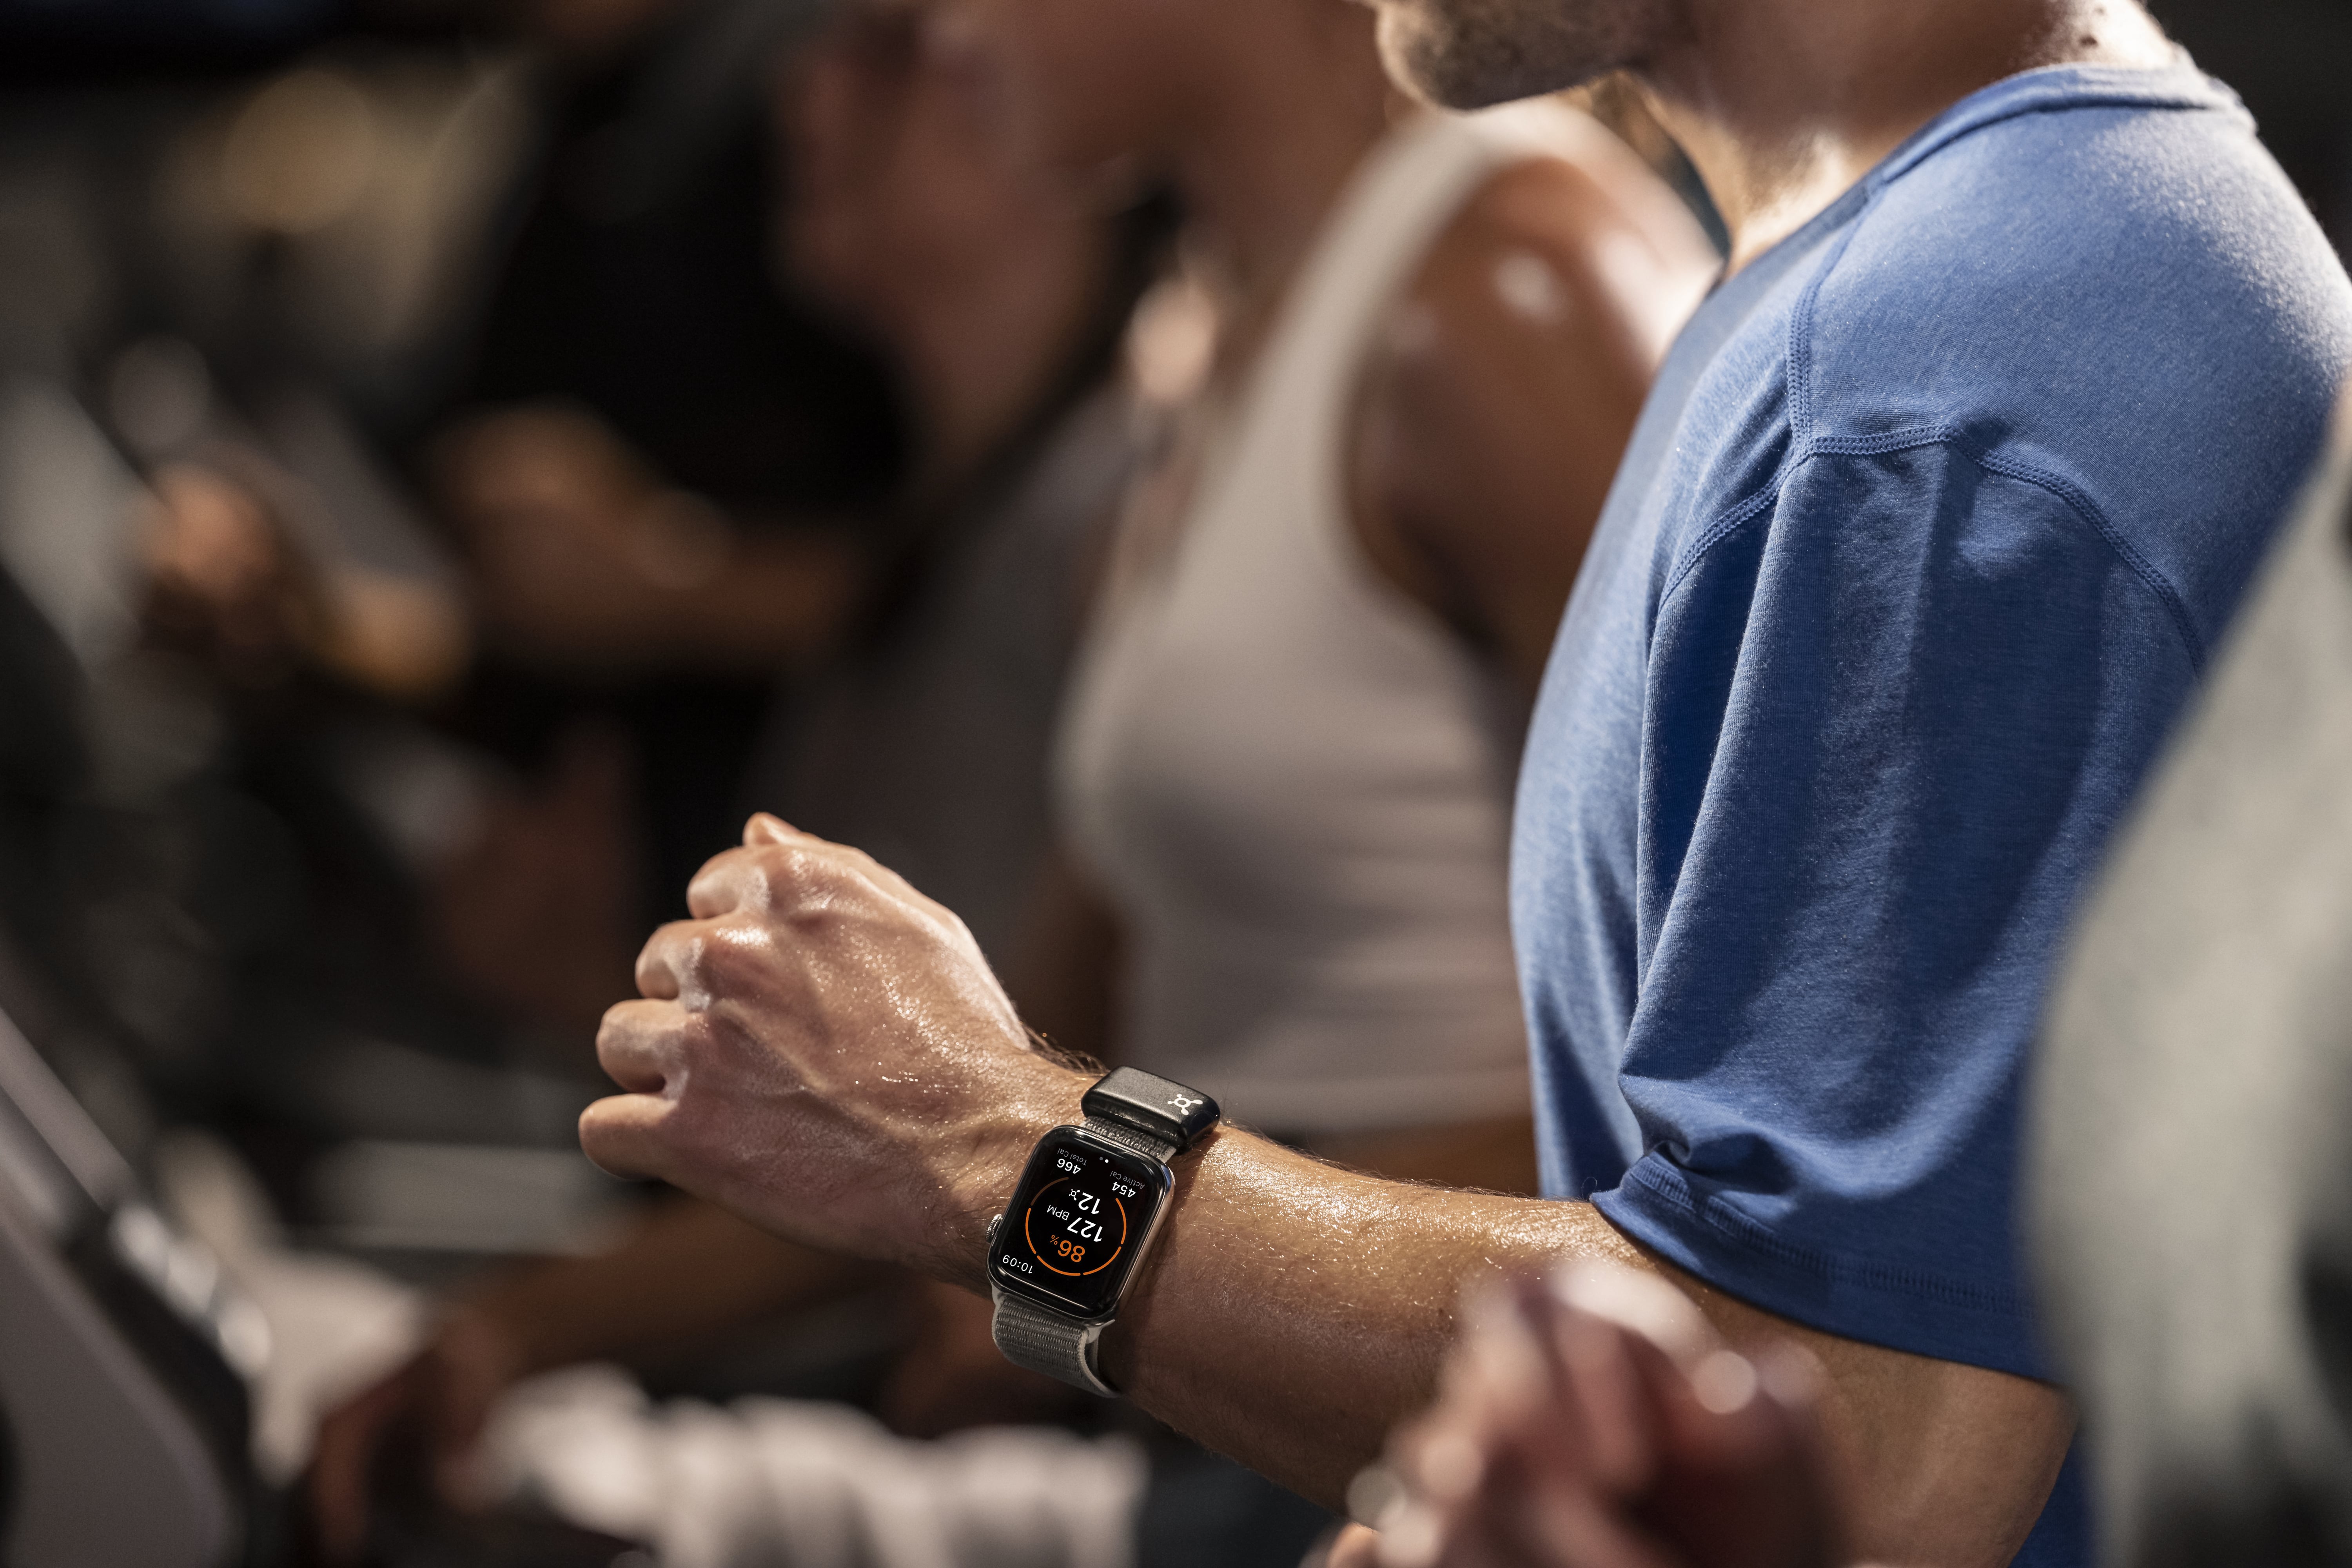 Orangetheory Fitness New City - Introducing the OTbeat Link. Orangetheory  members will now be able to connect their Apple Watch to our in-studio  heart rate monitoring system. Coming soon!!! Sign up to